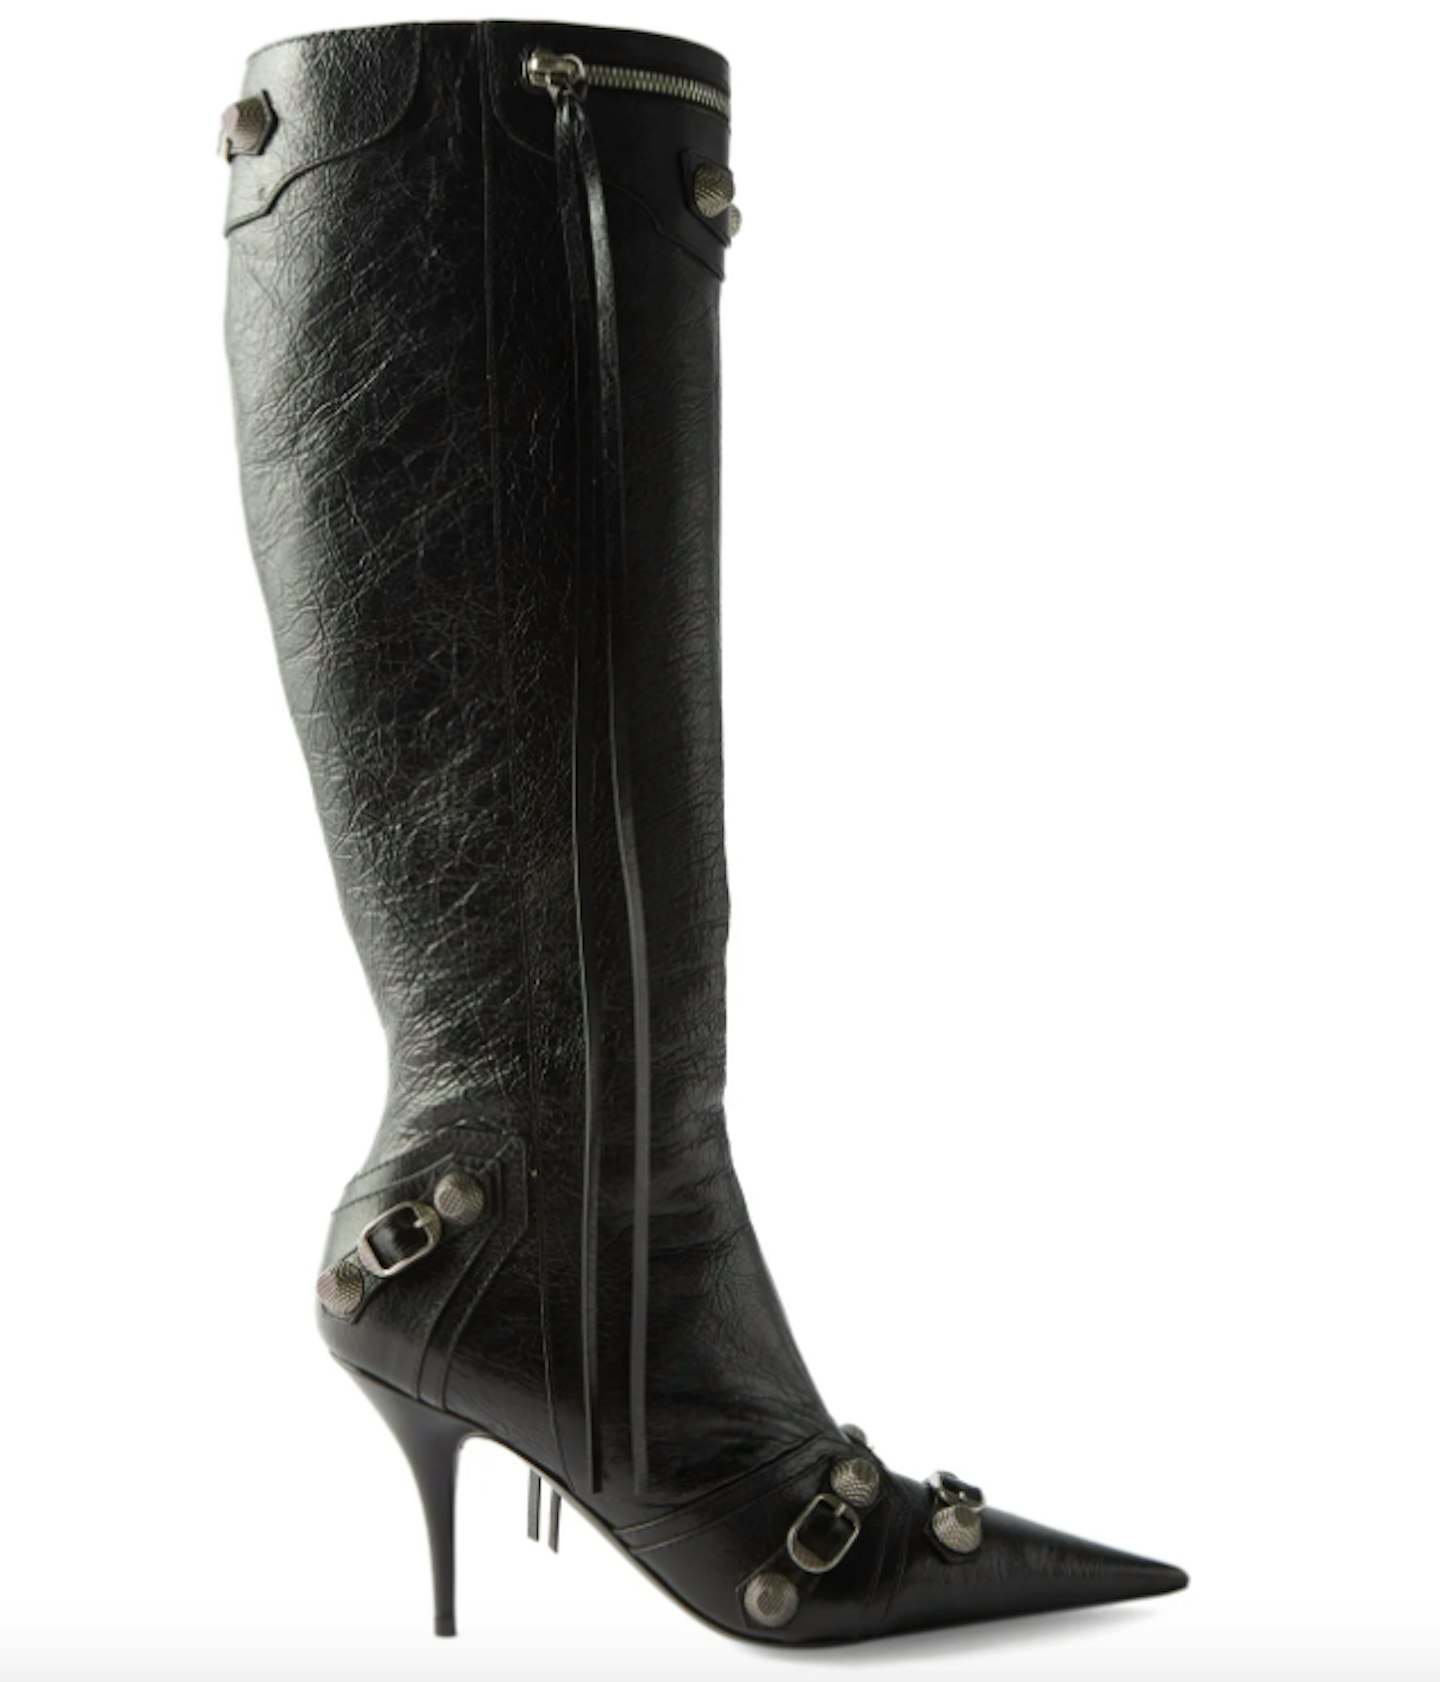 Balenciaga, Cagole Buckled Knee-High Leather Boots, £1,550